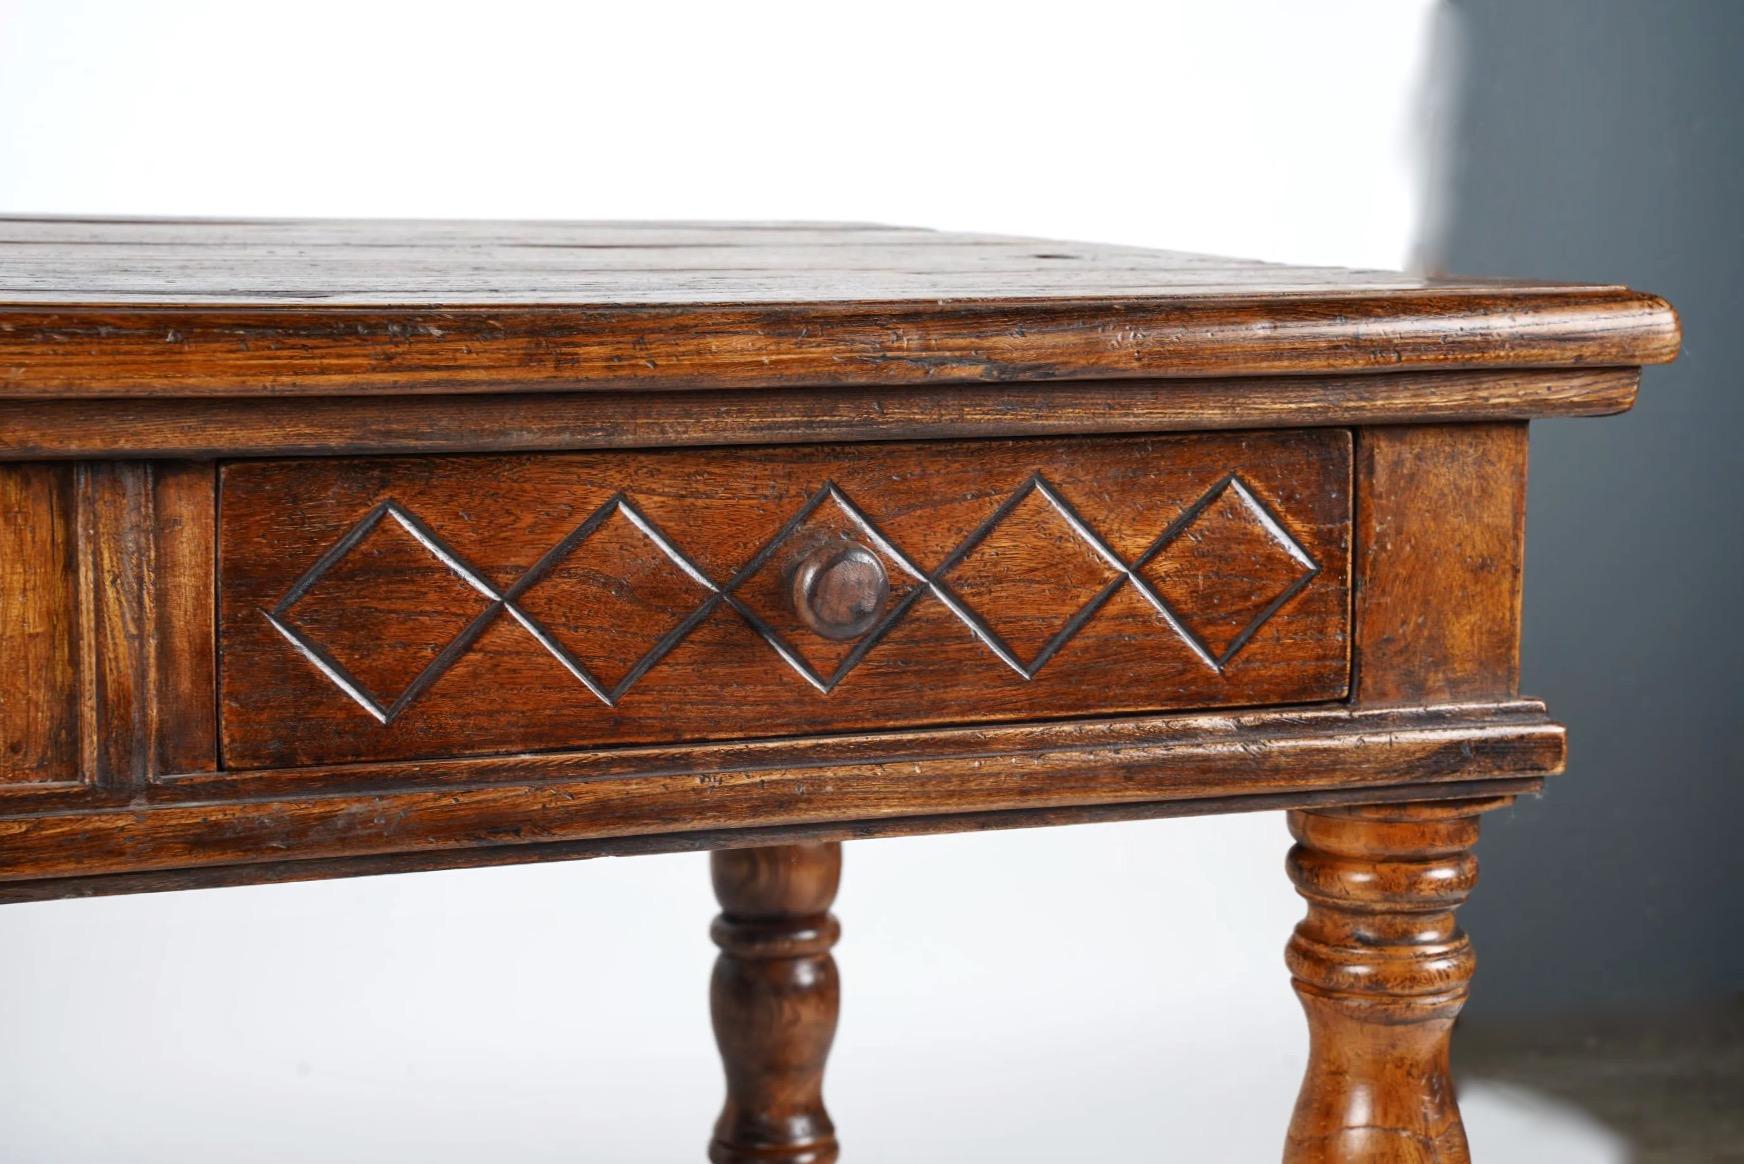 20th Century Spanish or Colonial-Style Baroque Writing or Library Table